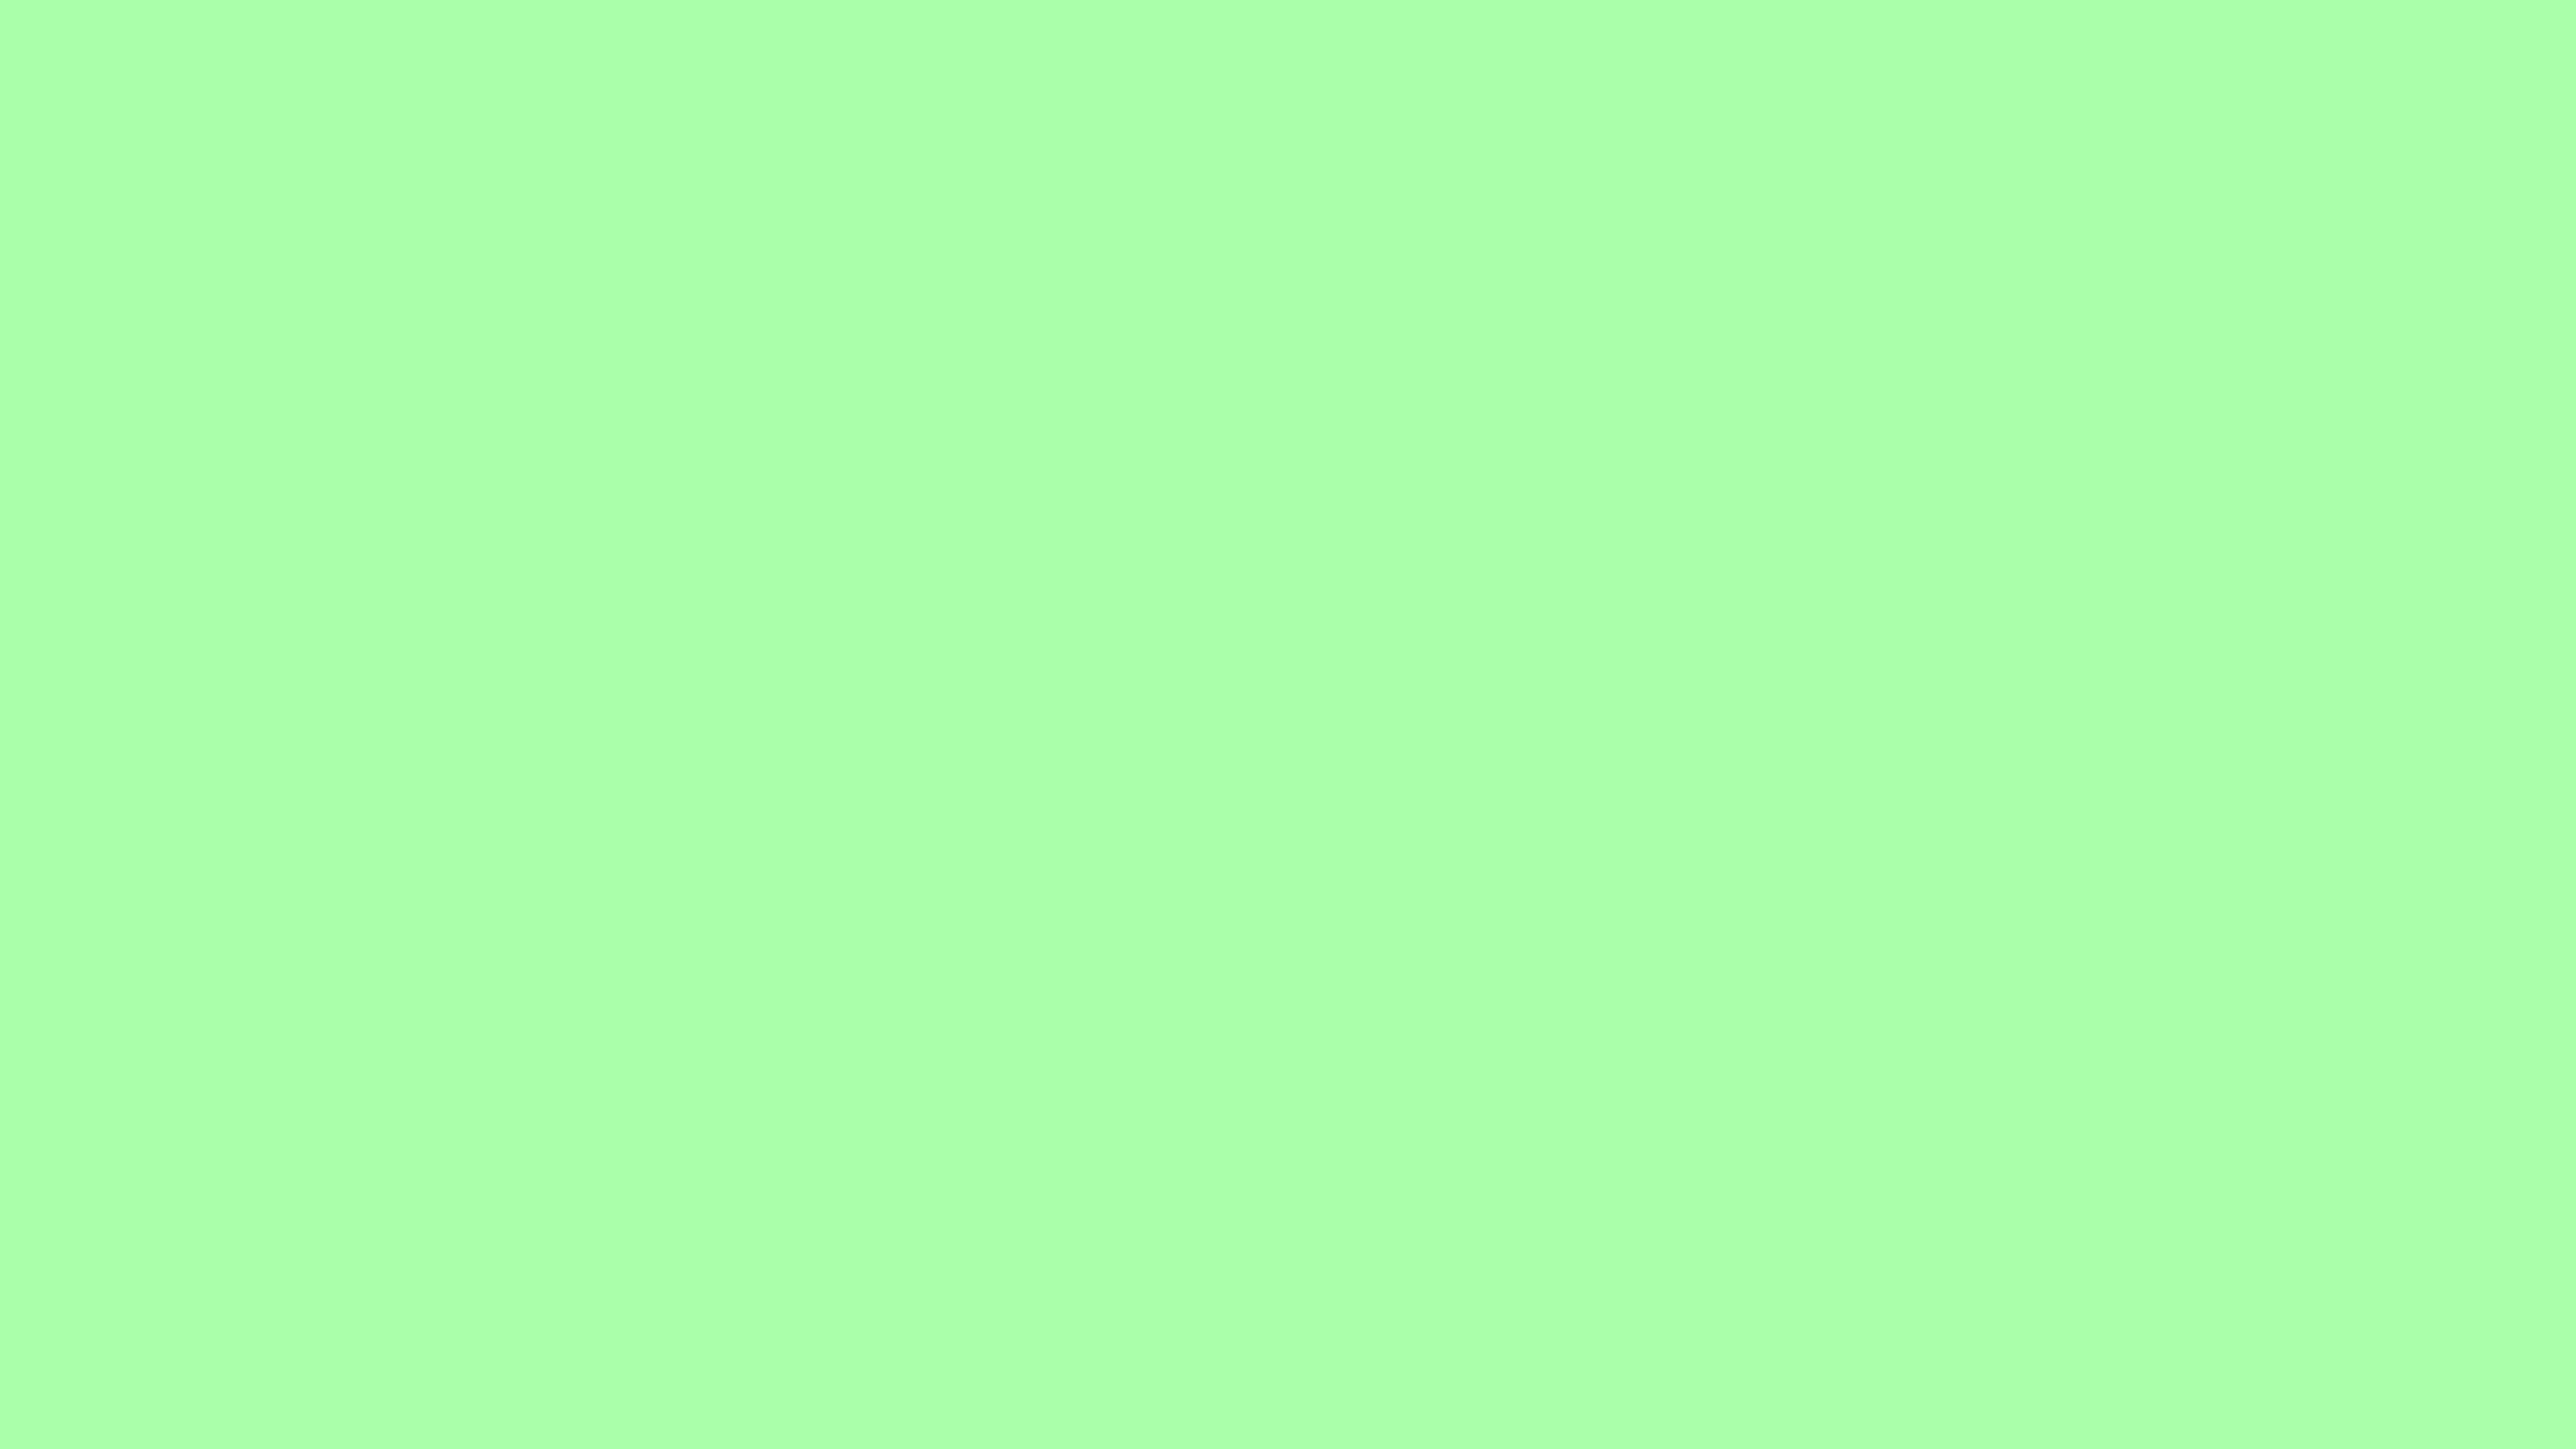 Creamy Mint Solid Color Background Image